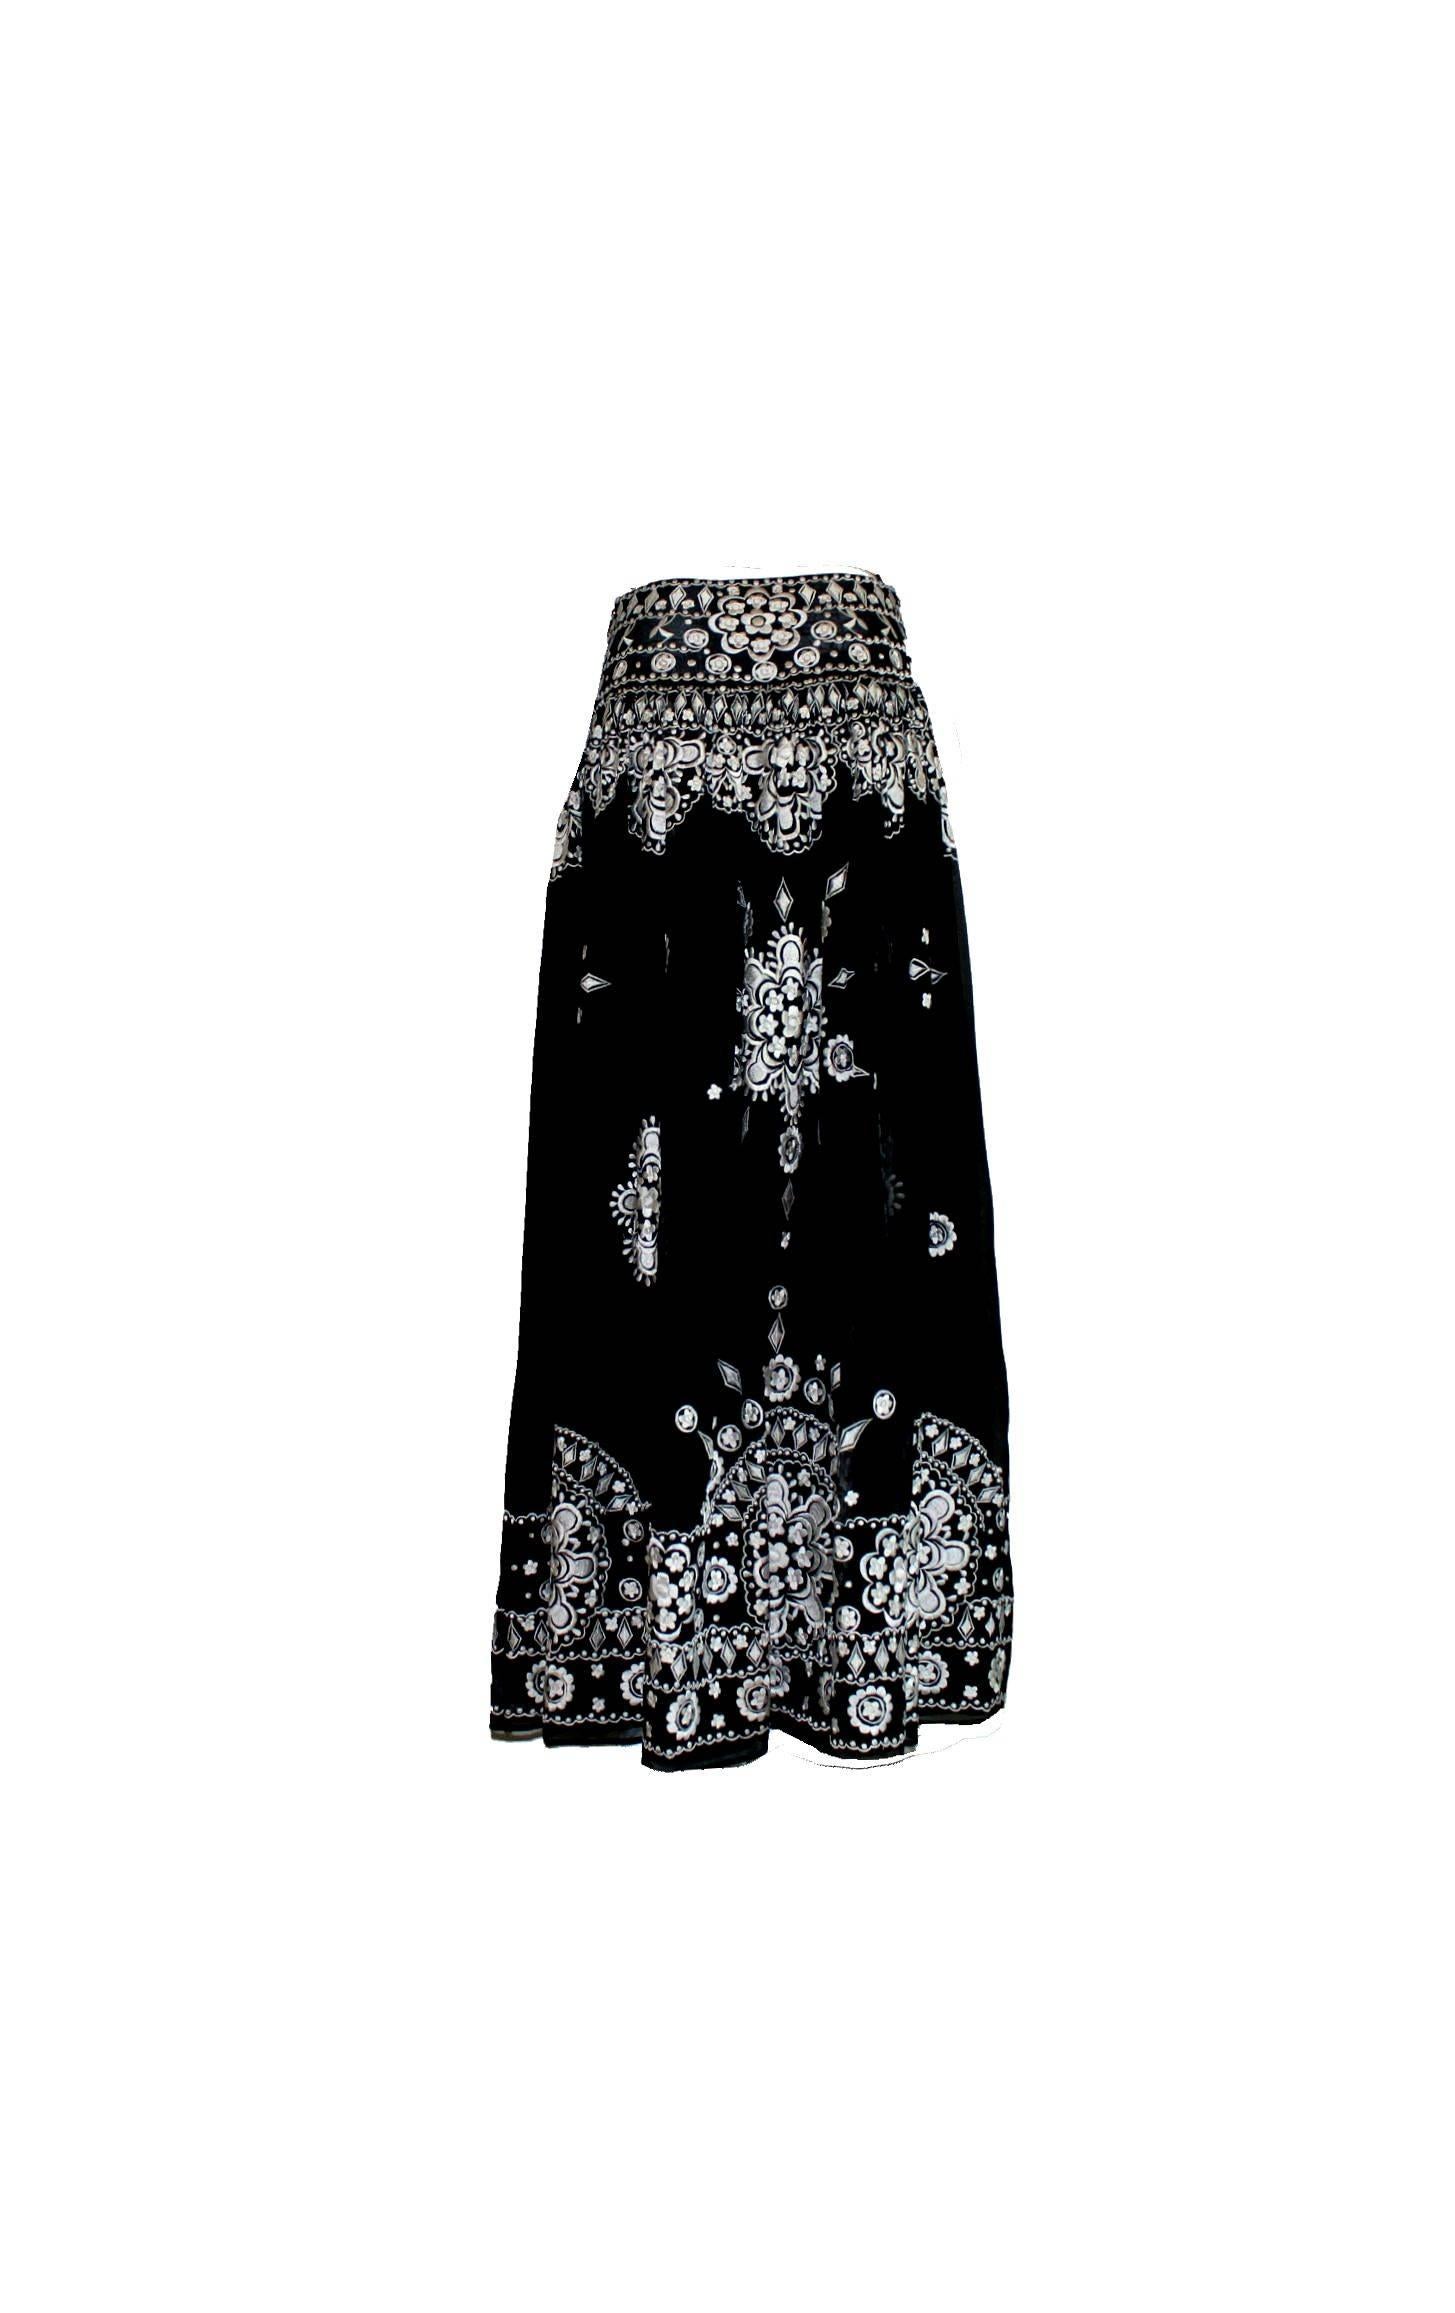 Beautiful maxi skirt by Emilio Pucci
Stunning piece 
Designed by Peter Dundas for Pucci
One of the most iconic pieces he designed for Pucci
Embroidered all over
Full length
Closes with zip on side
Made in Italy
Dry Cleaning Only
